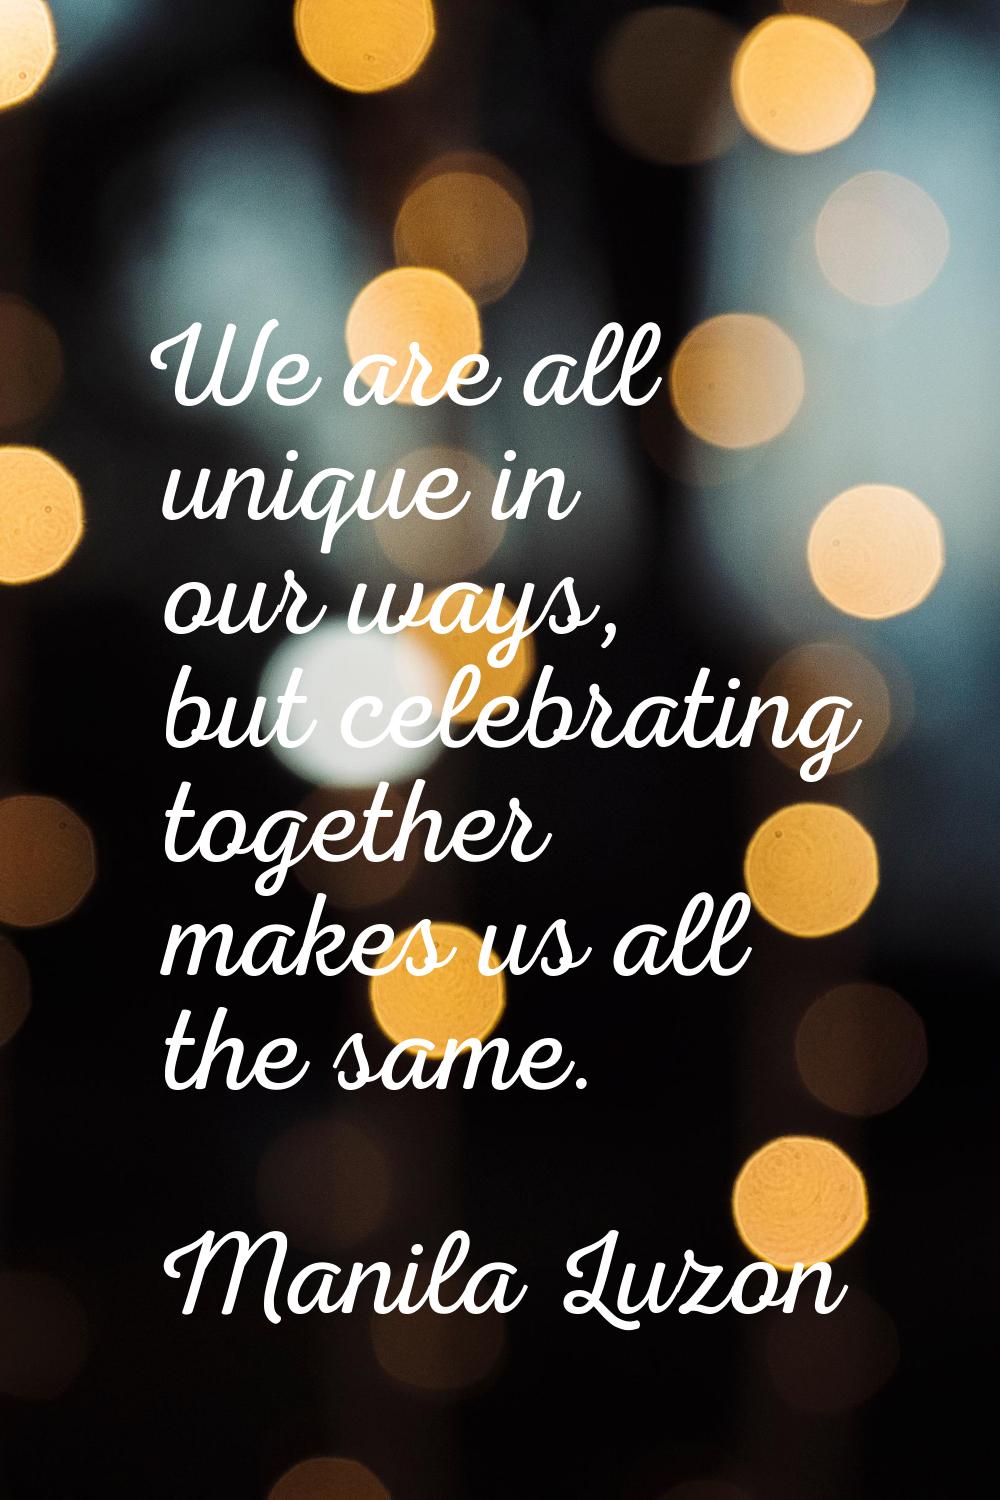 We are all unique in our ways, but celebrating together makes us all the same.